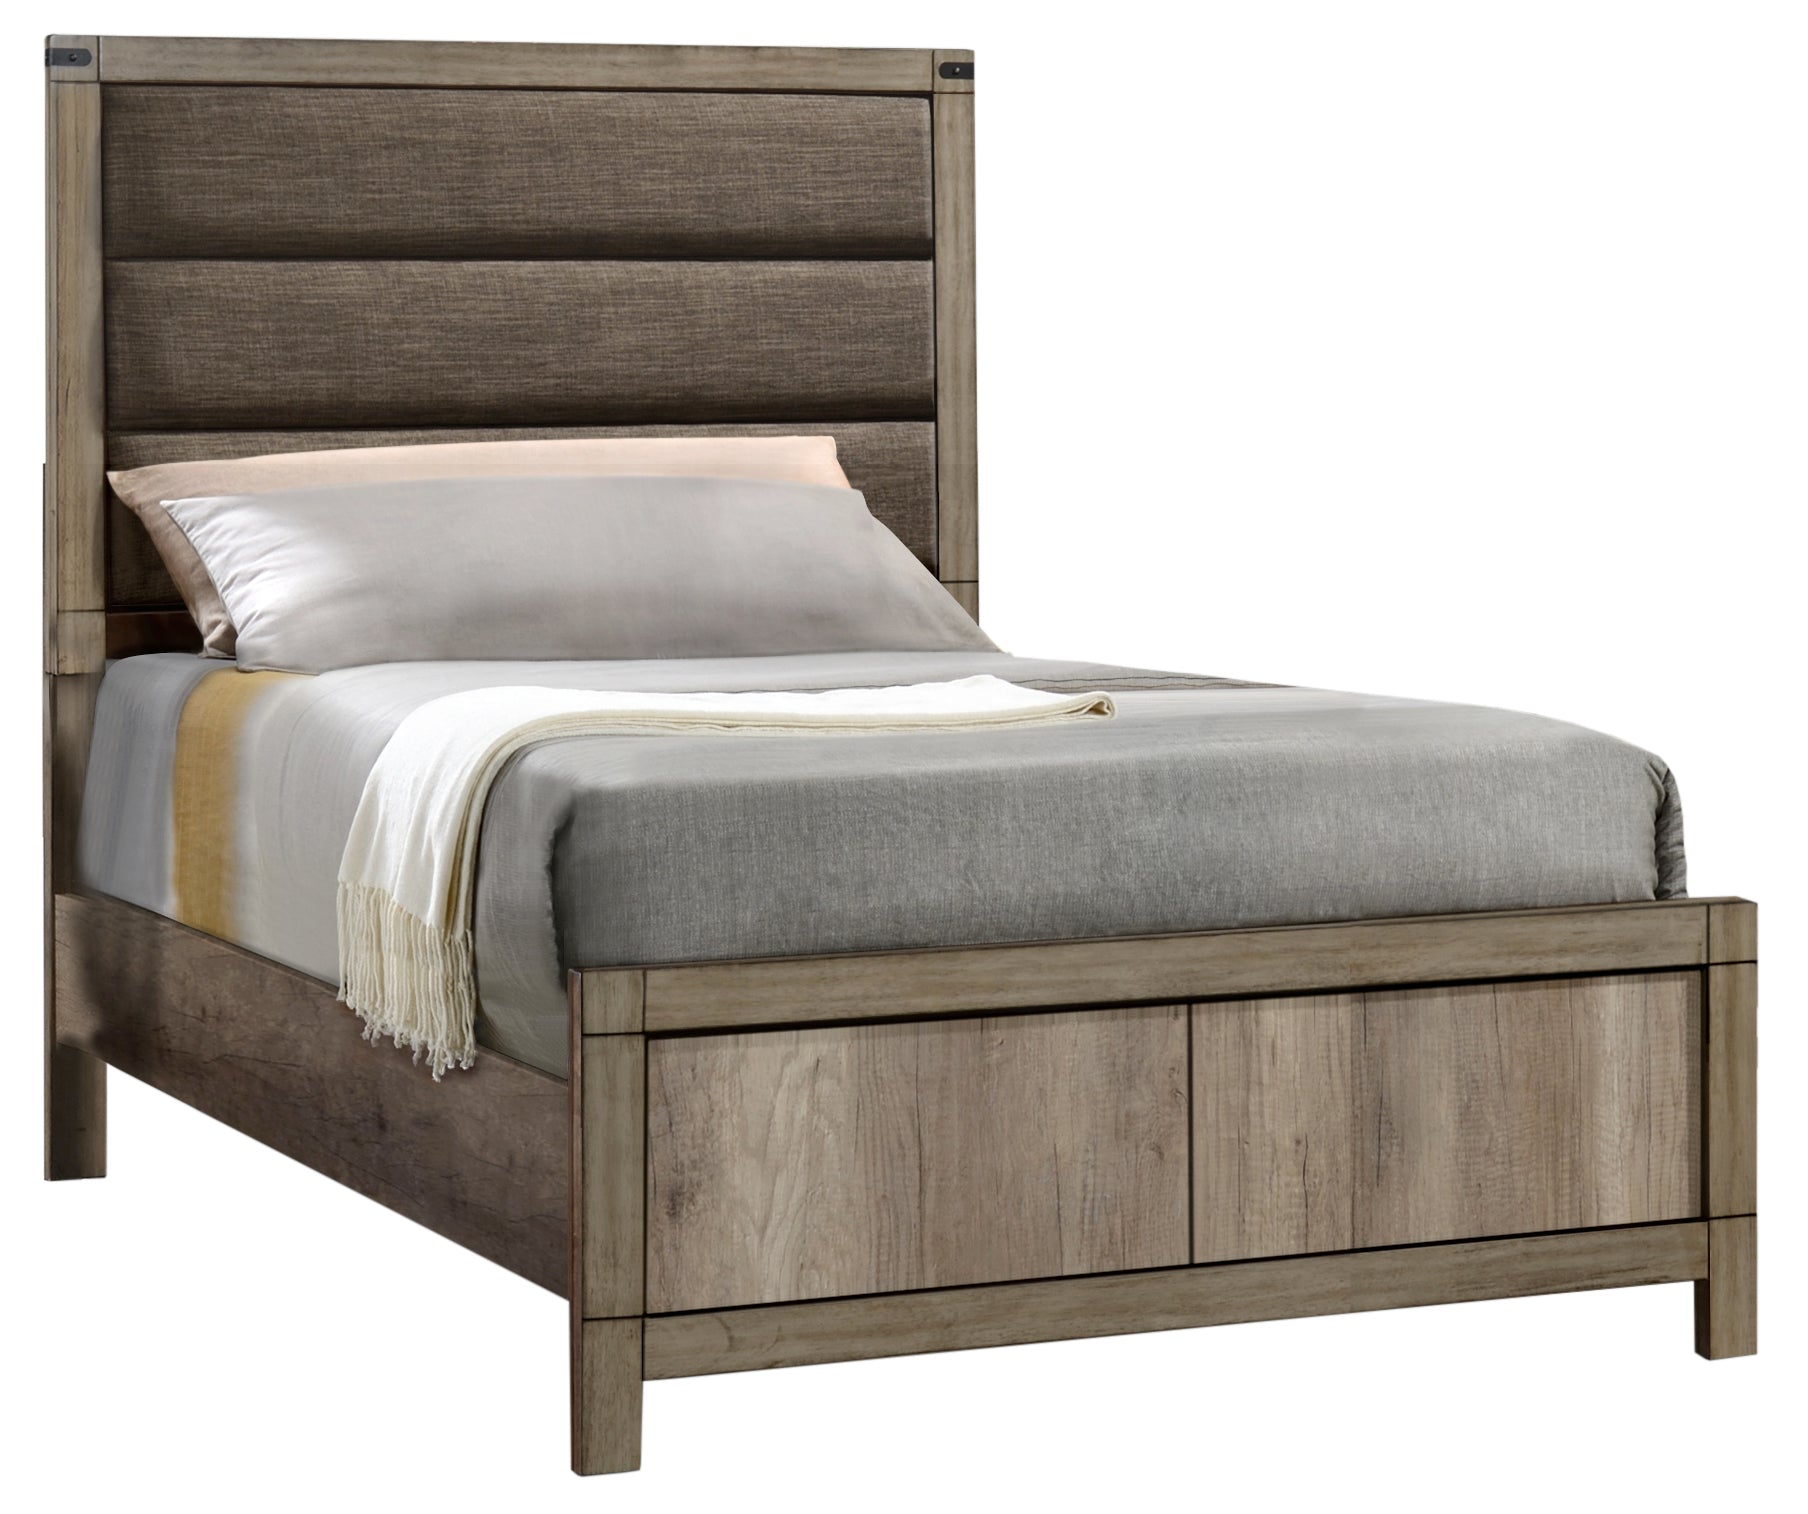 Matteo Melamine Finish Fabric Upholstered Panel Bedroom Set, Heat, Moisture, Stain Resistant, Contemporary Rustic